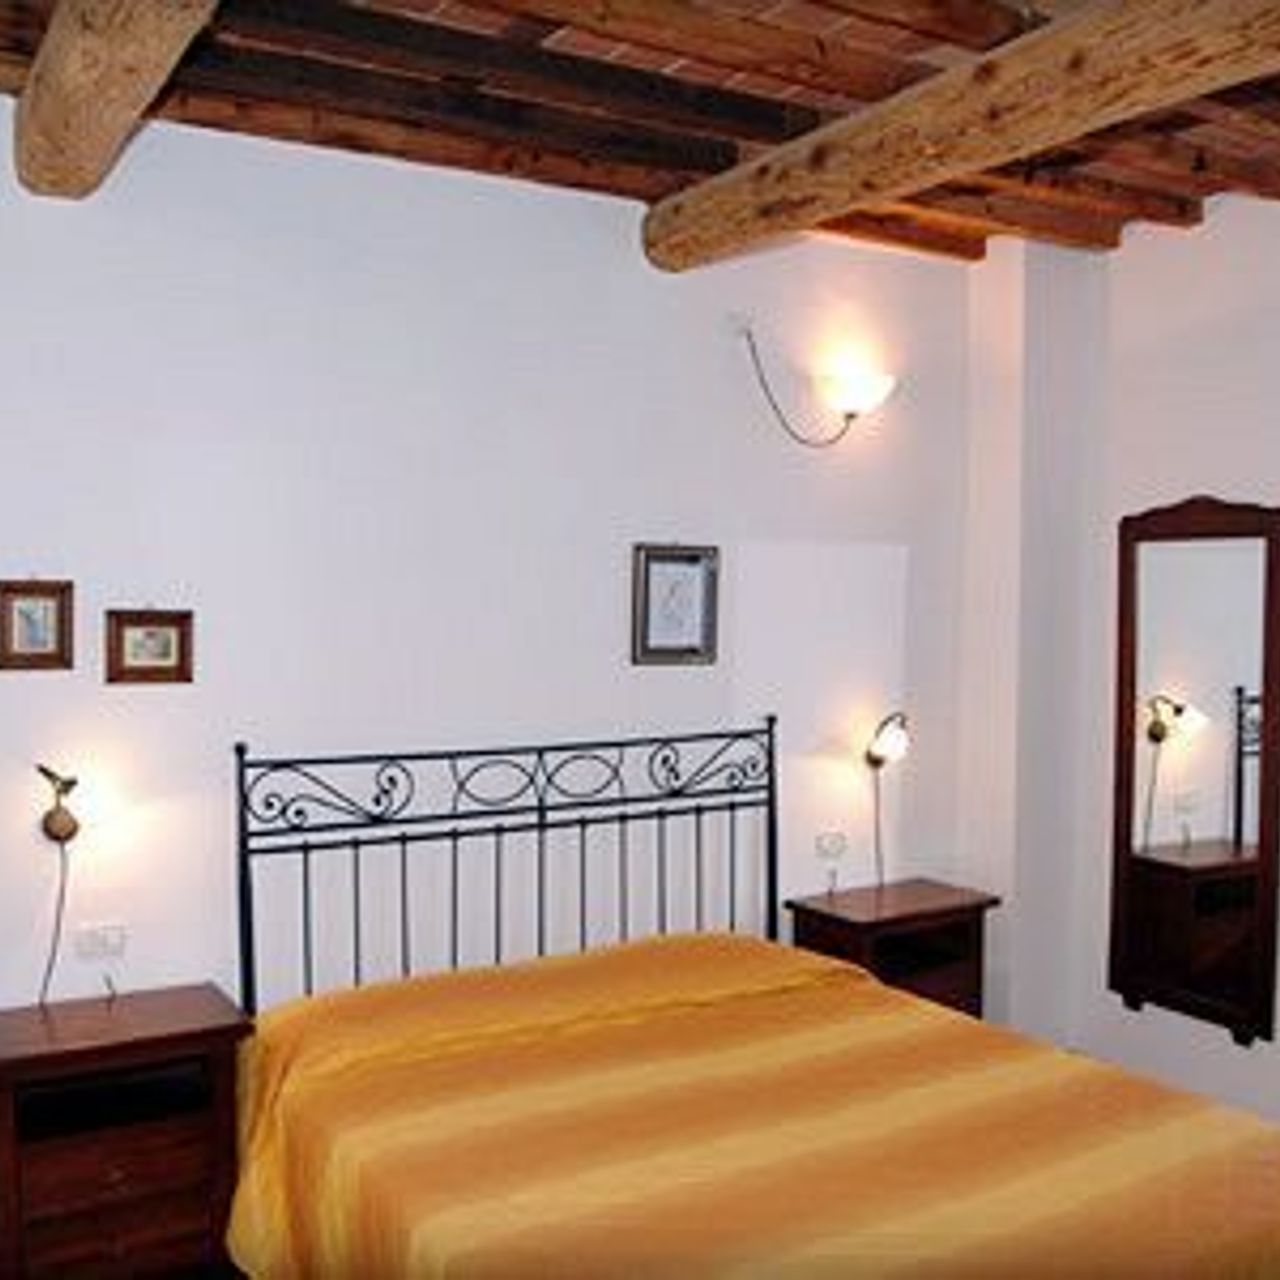 Hotel Residenza il Borgo - Lucca - Great prices at HOTEL INFO